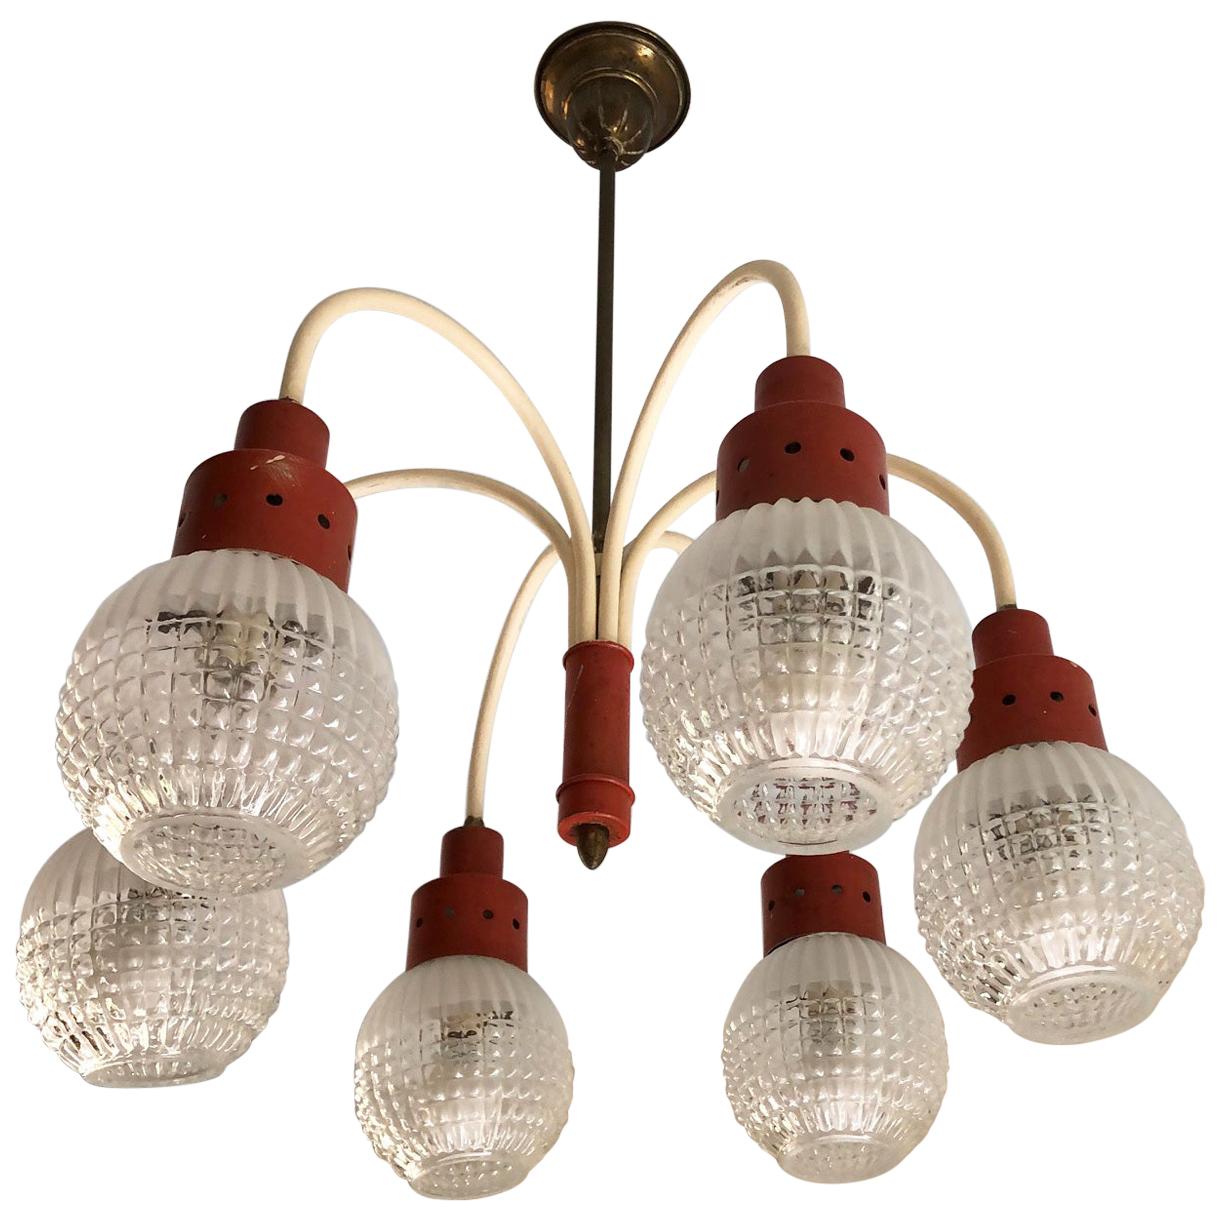 Original Italian Chandelier from 1970s with Six Lights, Orange and Cream Color